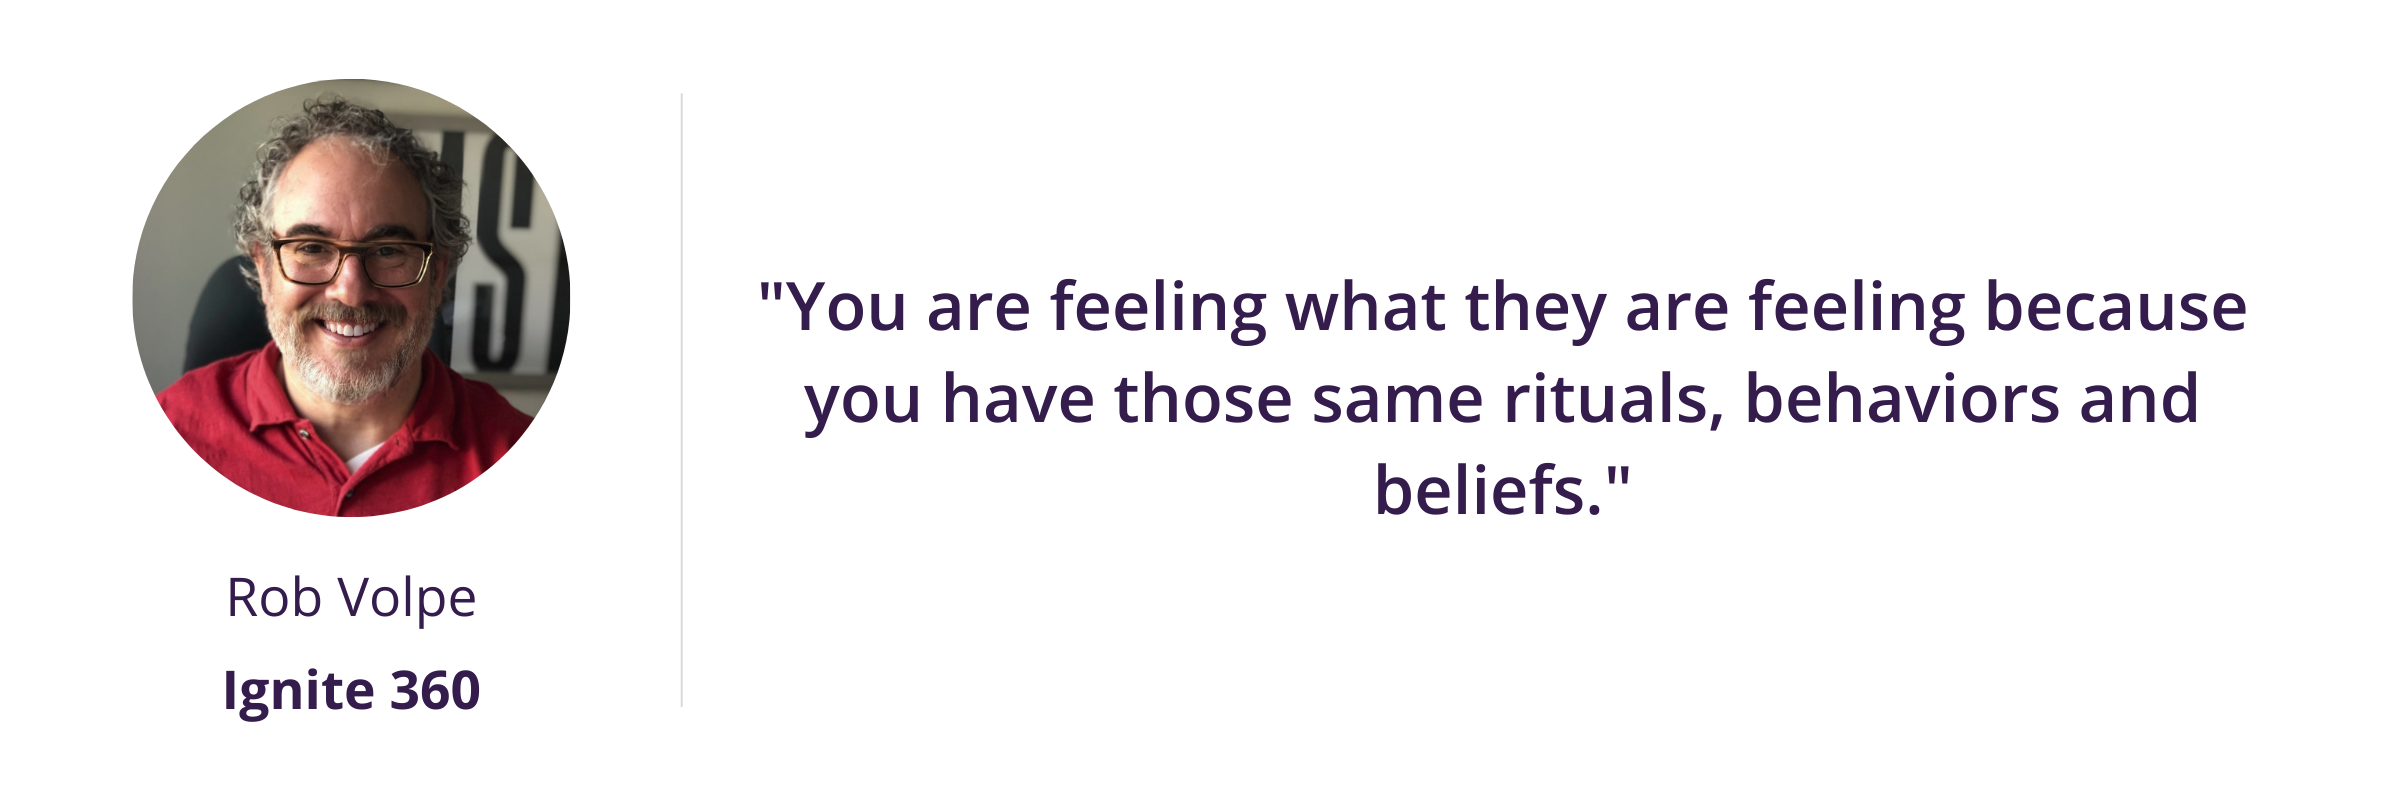 You are feeling what they are feeling because you have those same rituals, behaviors and beliefs.